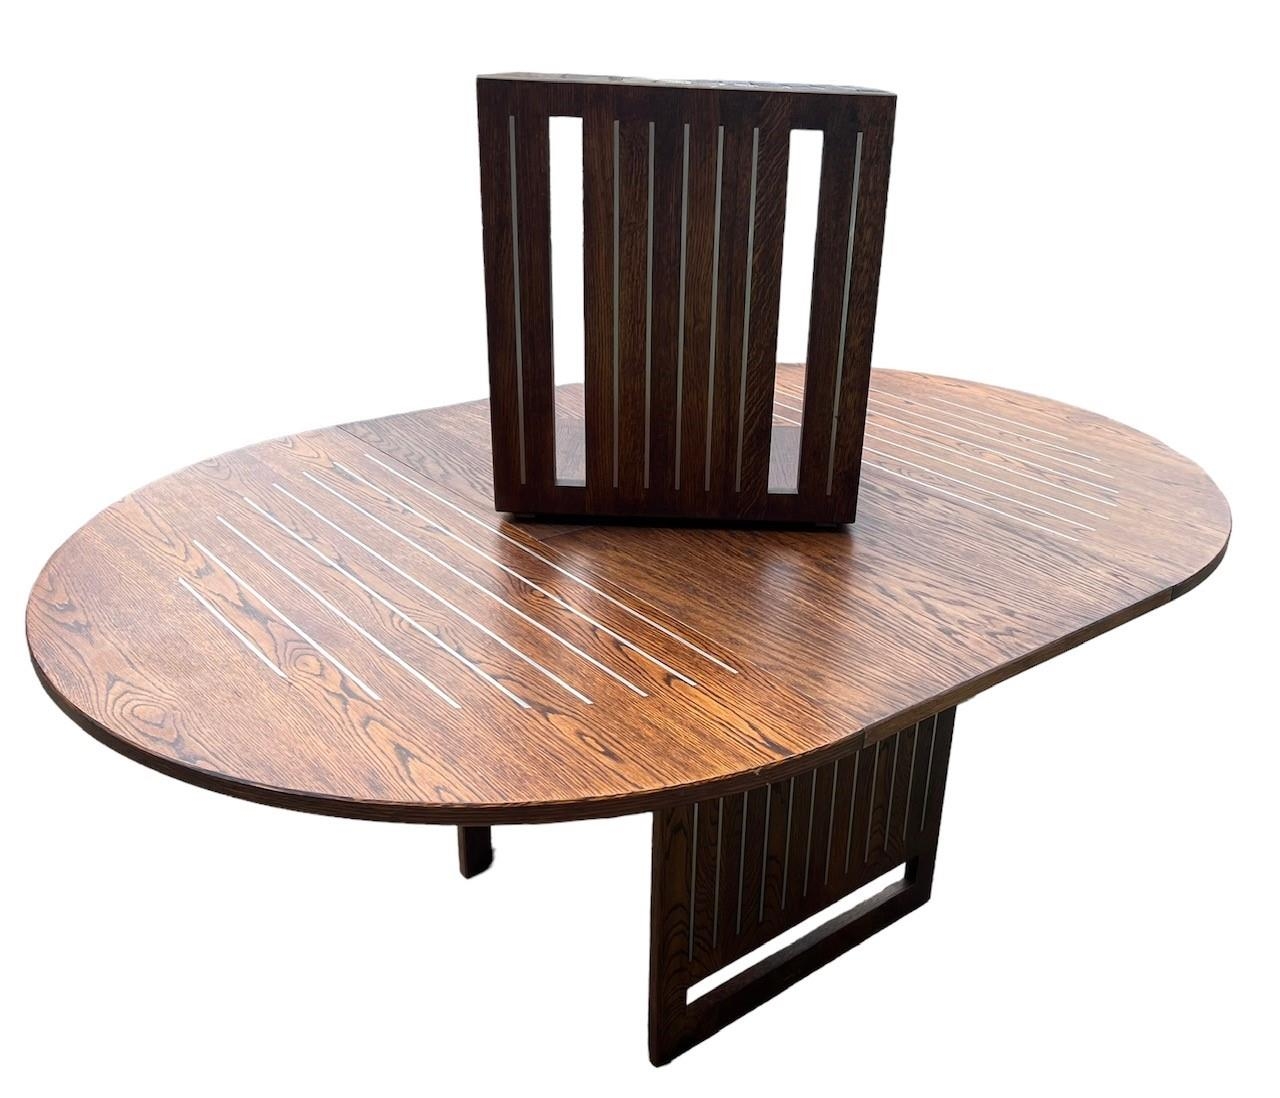 A CONTEMPORARY OAK AND STEEL INLAY DRAW LEAF DINING TABLE With single leaf, together with a matching - Image 6 of 7